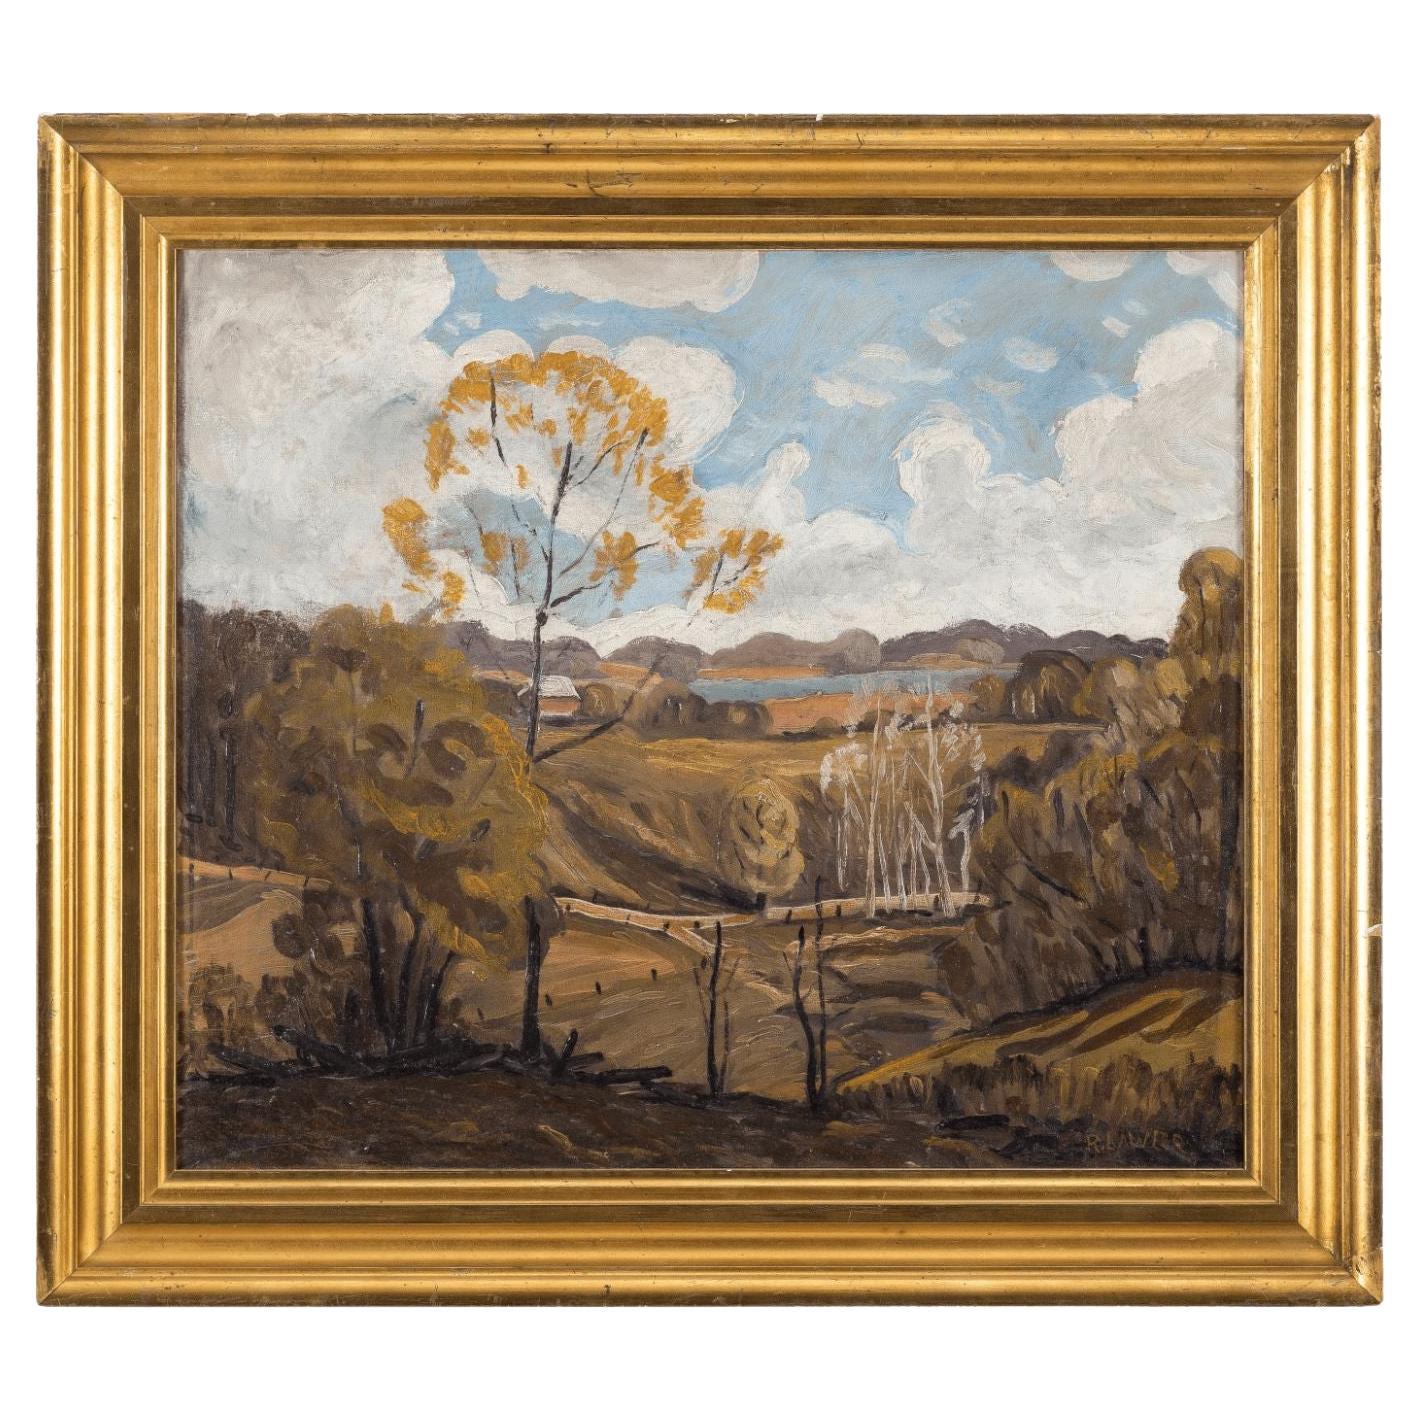 American Landscape Oil Painting by R. Lawler